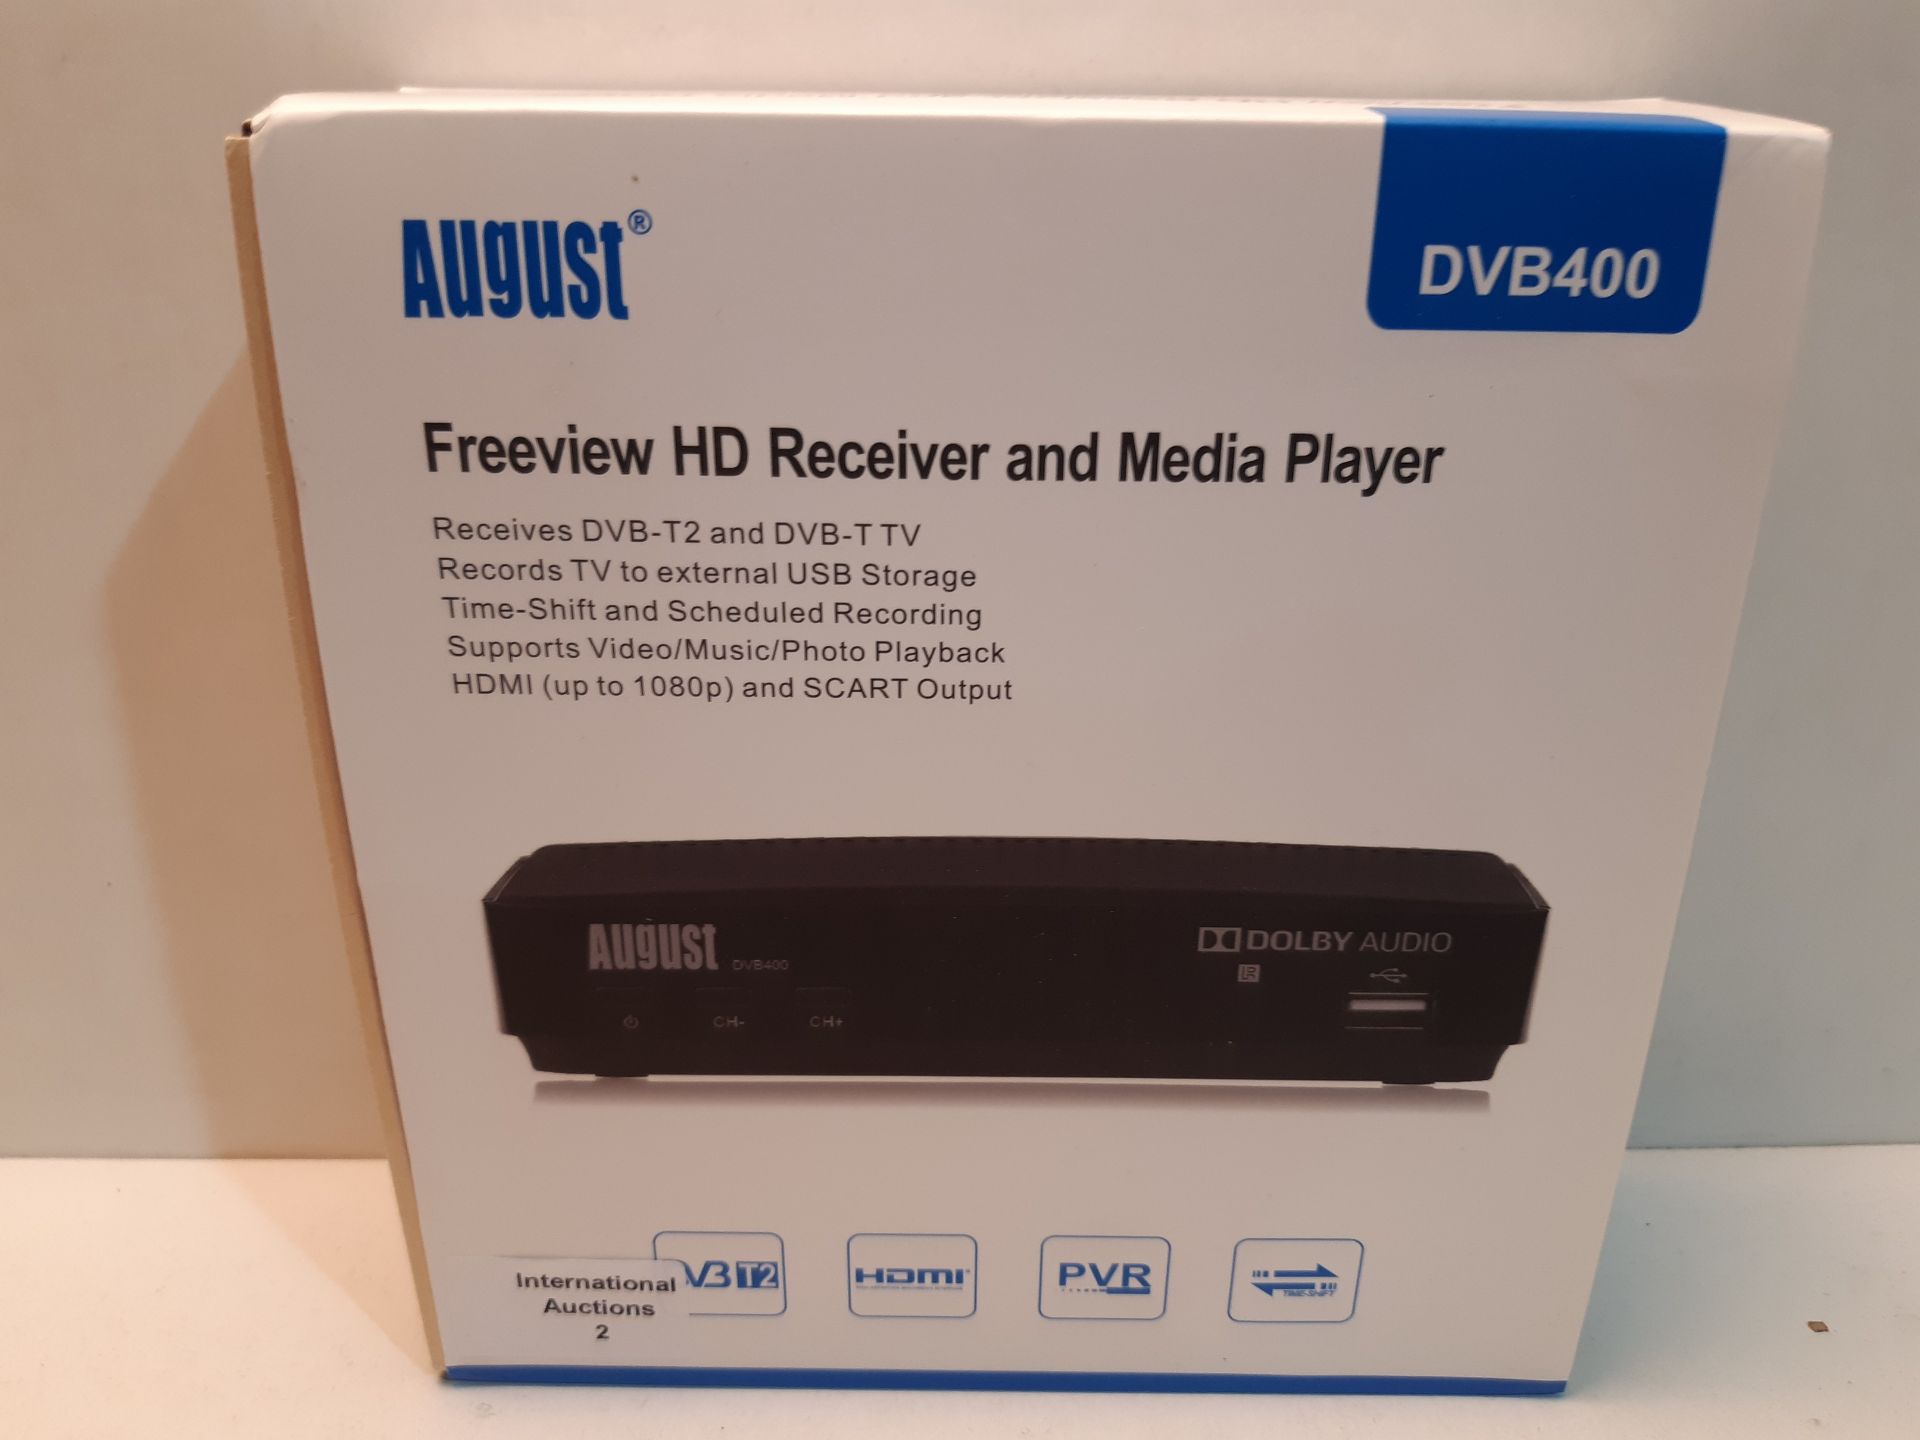 RRP £29.56 HD Freeview Set Top Box ? August DVB400 - Watch - Image 2 of 2